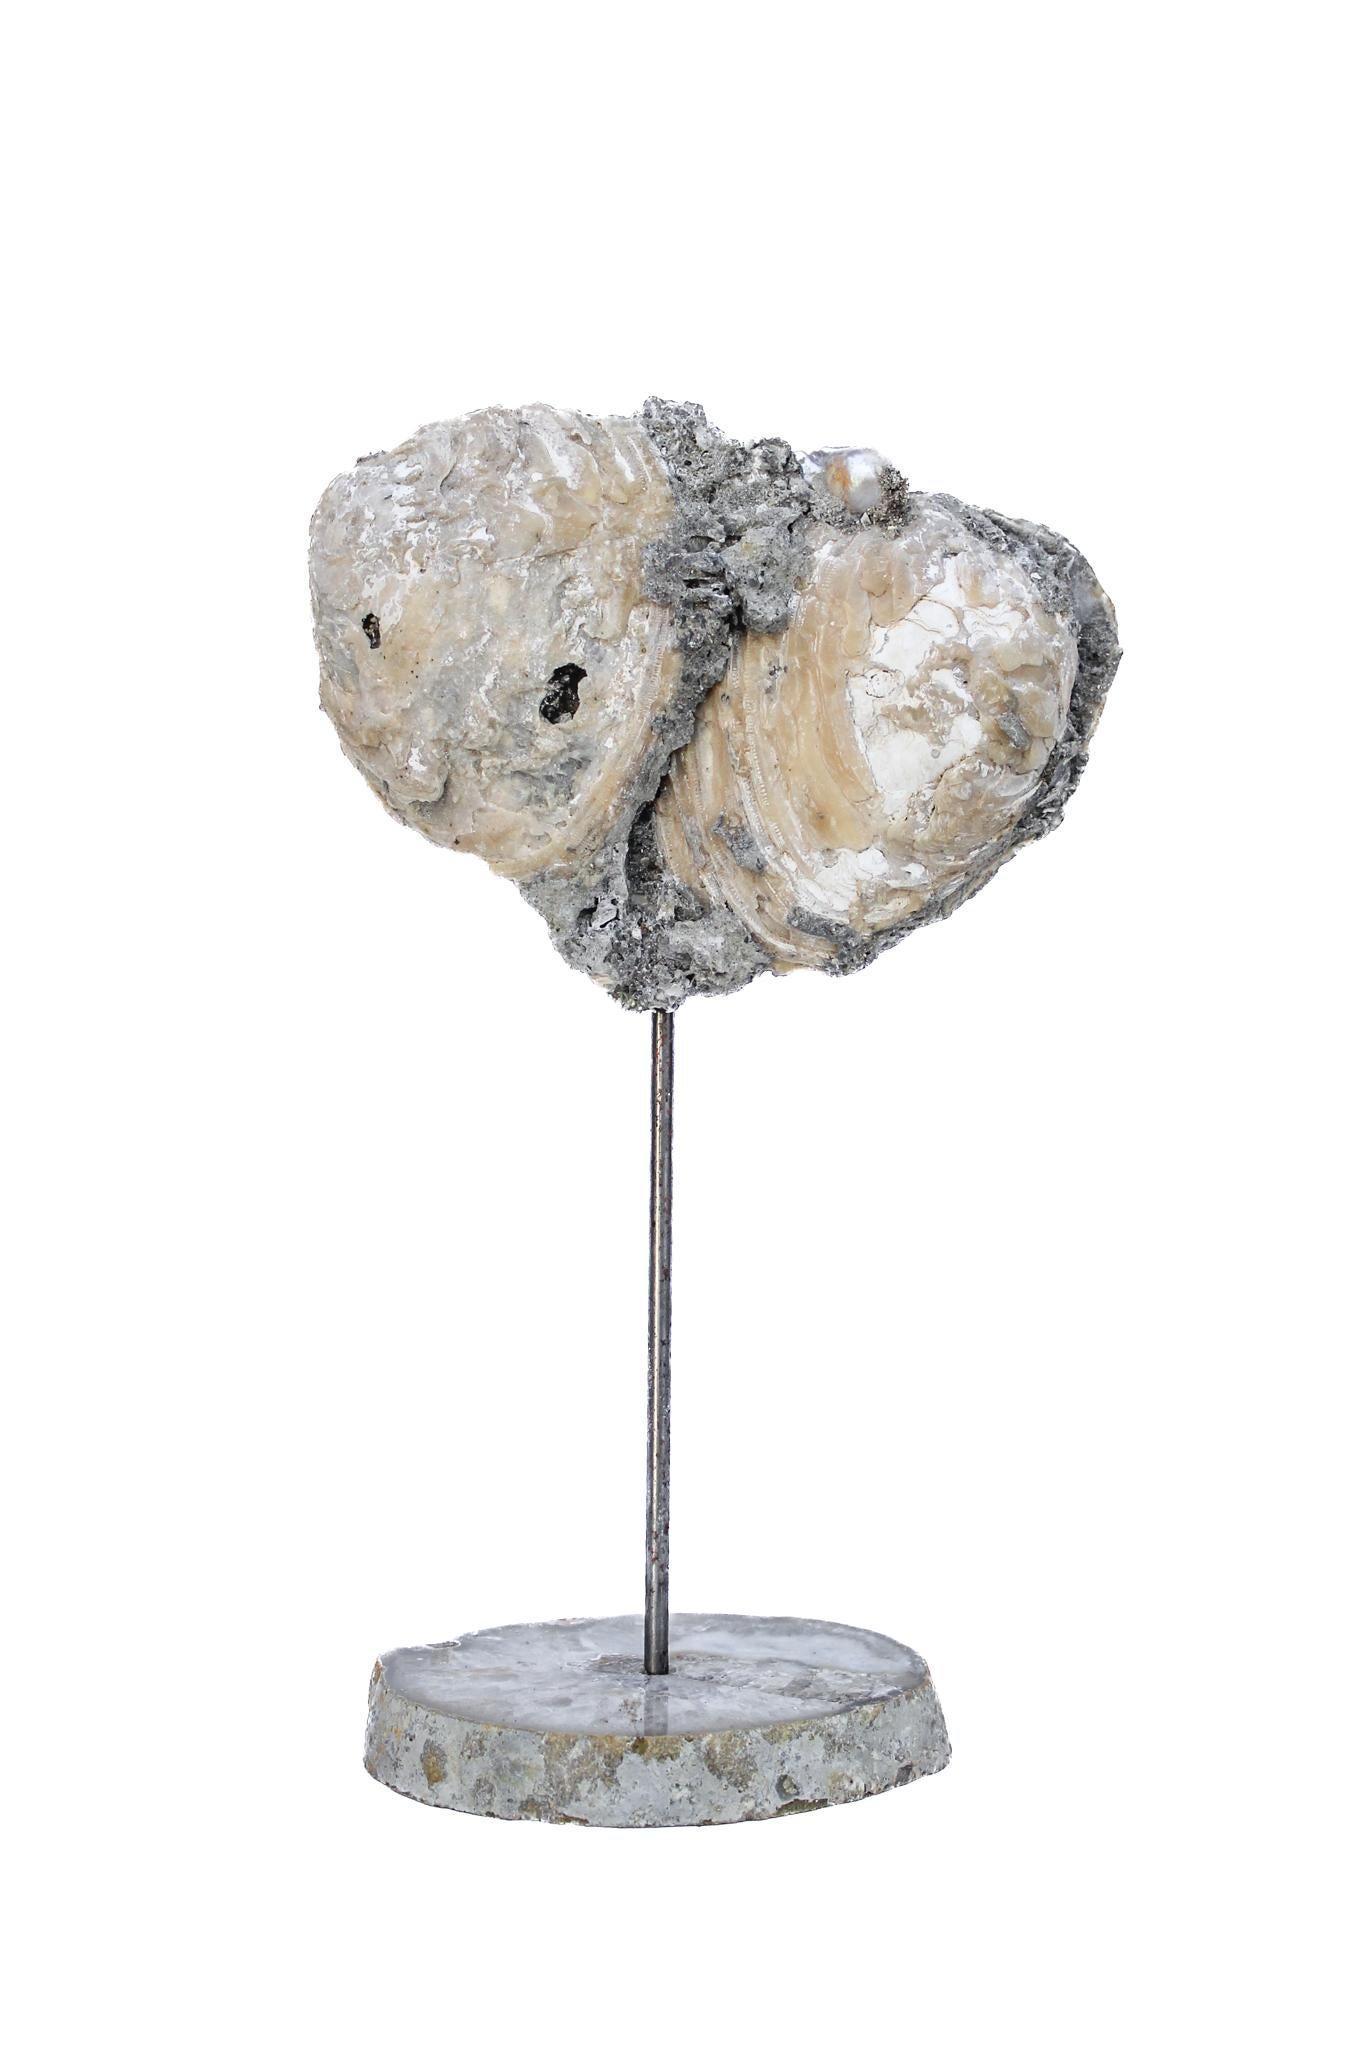 Sculptural fossil clamshell with baroque pearls on a polished agate base.

The fossil clamshell shell is mounted onto the polished agate base and adorned with the coordinating baroque pearl. The clamshell and its grey matrix emulate a heart.